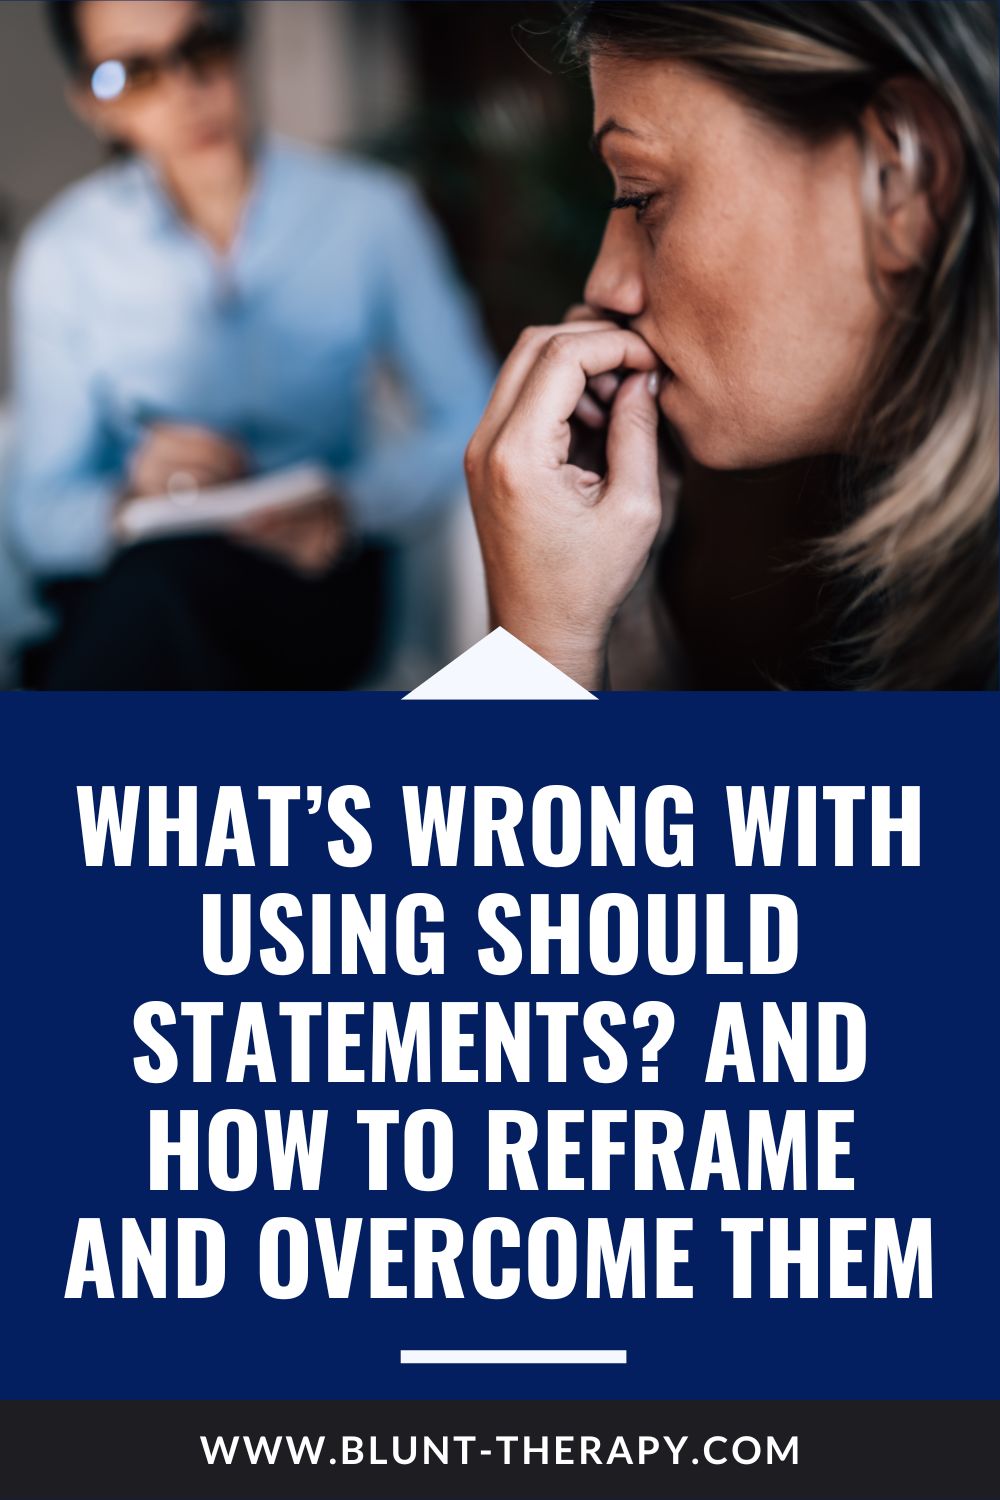 What’s Wrong With Using Should Statements? And How to Reframe and Overcome Them